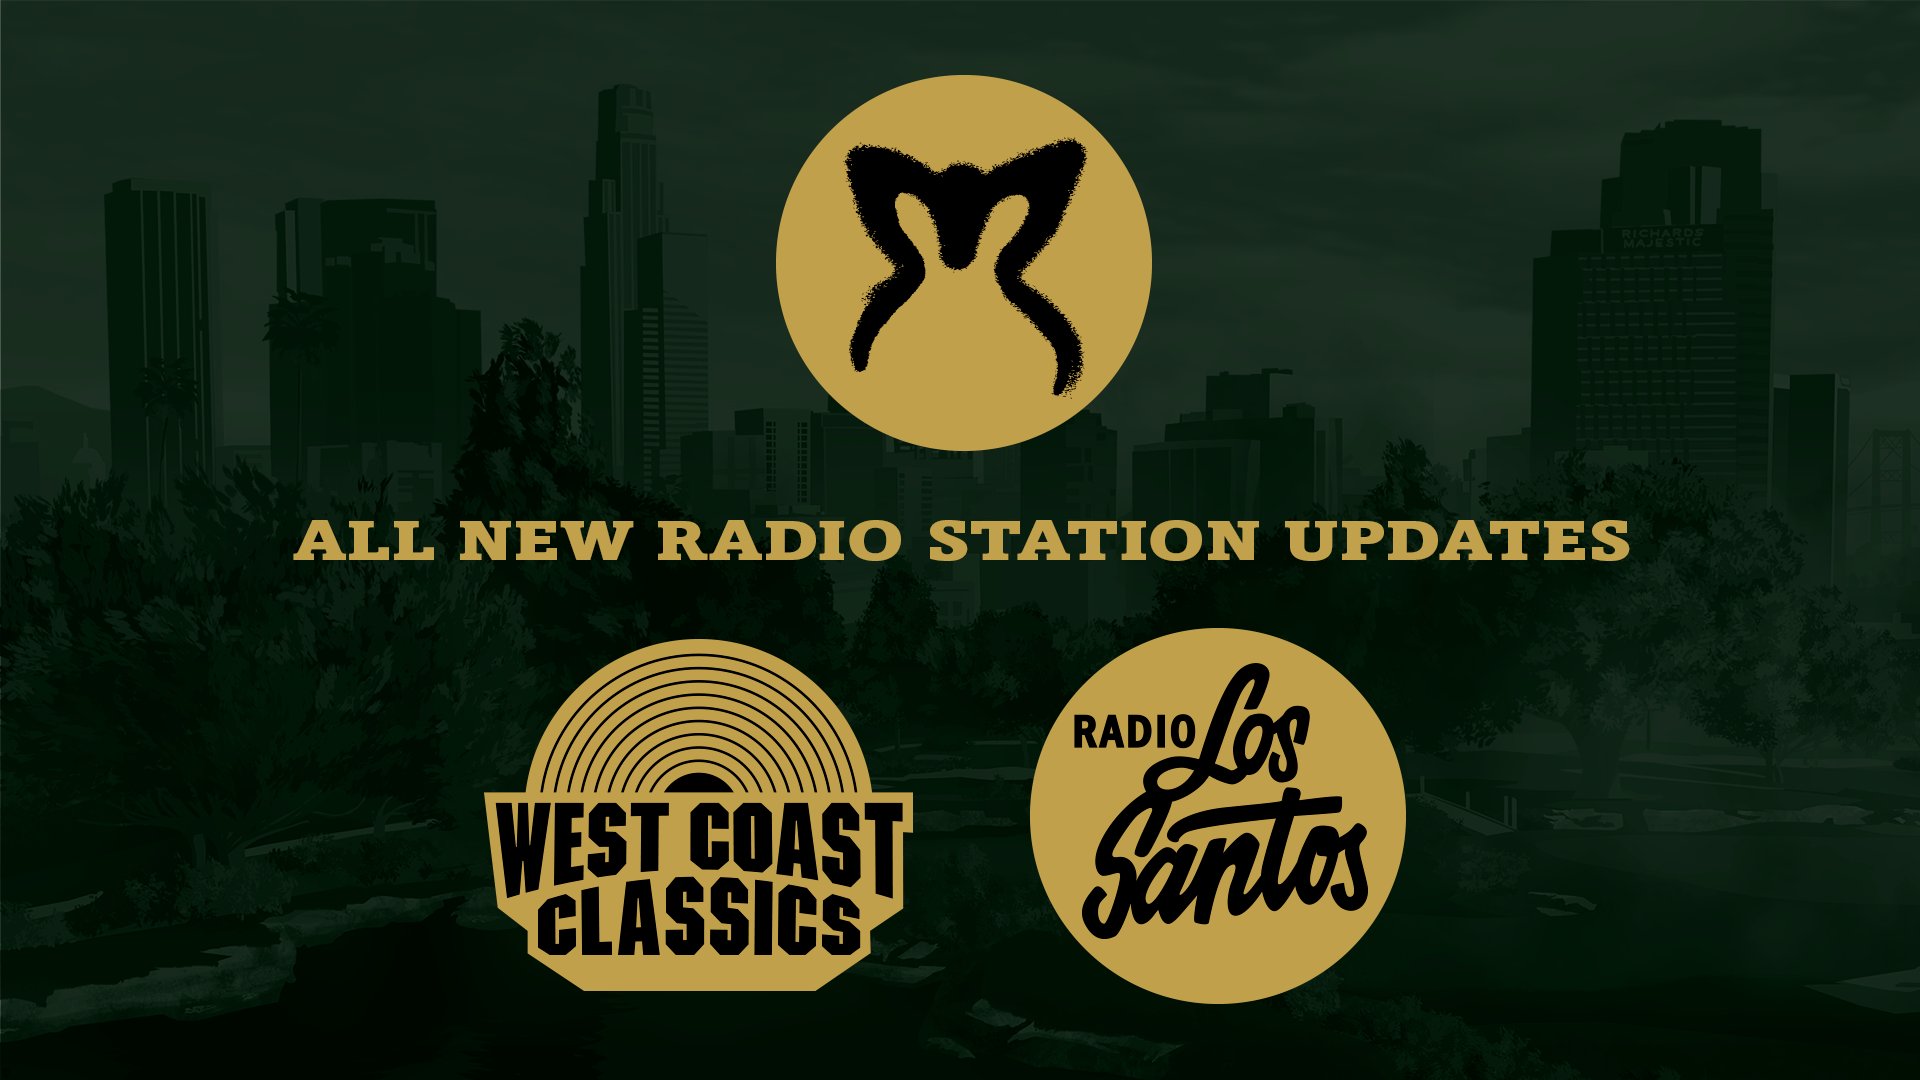 Posters Materialism First GTA Online new radio station launches this week | GamesRadar+